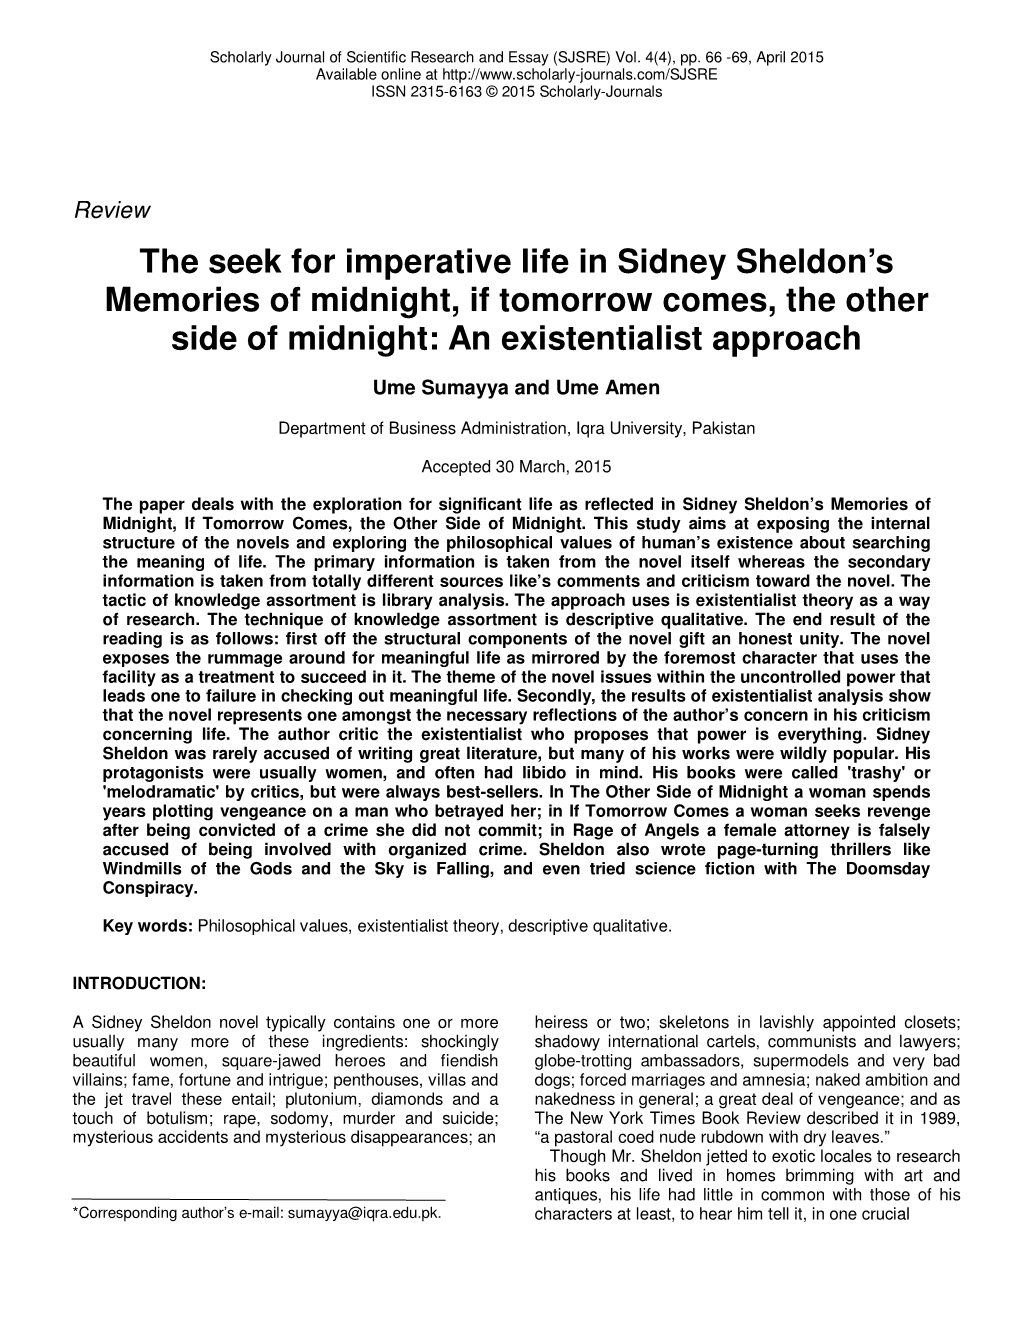 The Seek for Imperative Life in Sidney Sheldon's